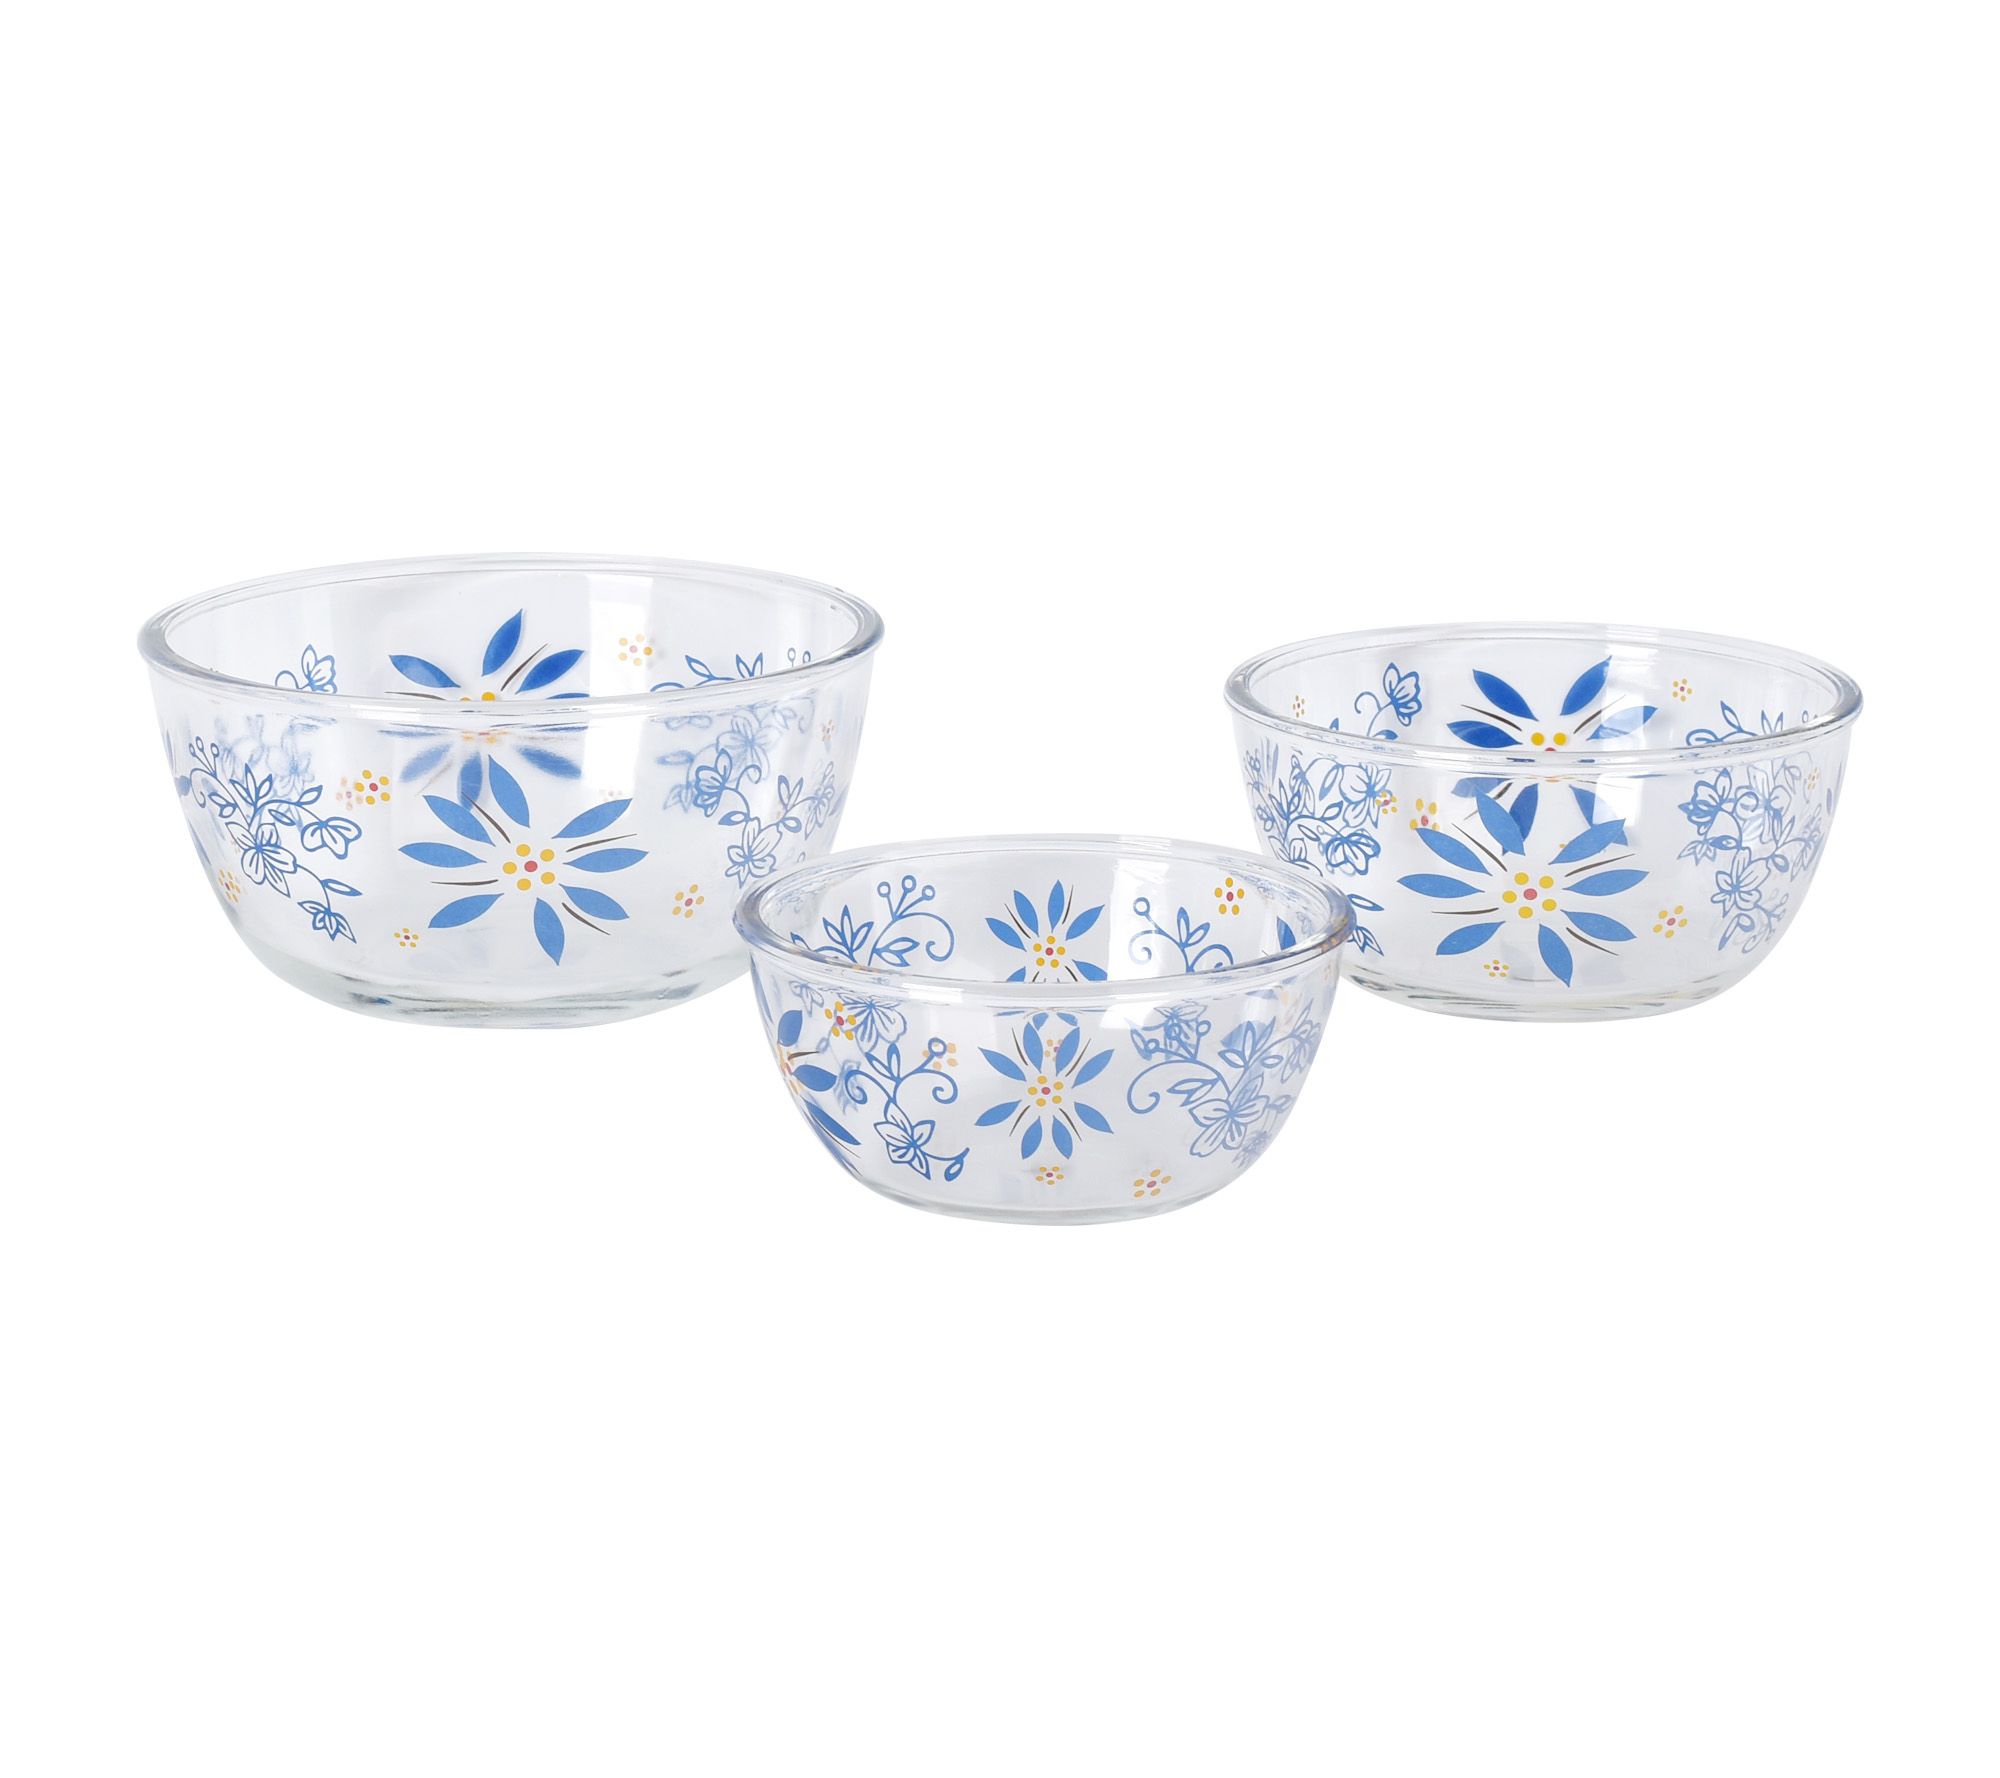 Best Deal for Glass Mixing Bowls - Nesting Bowls - Cute